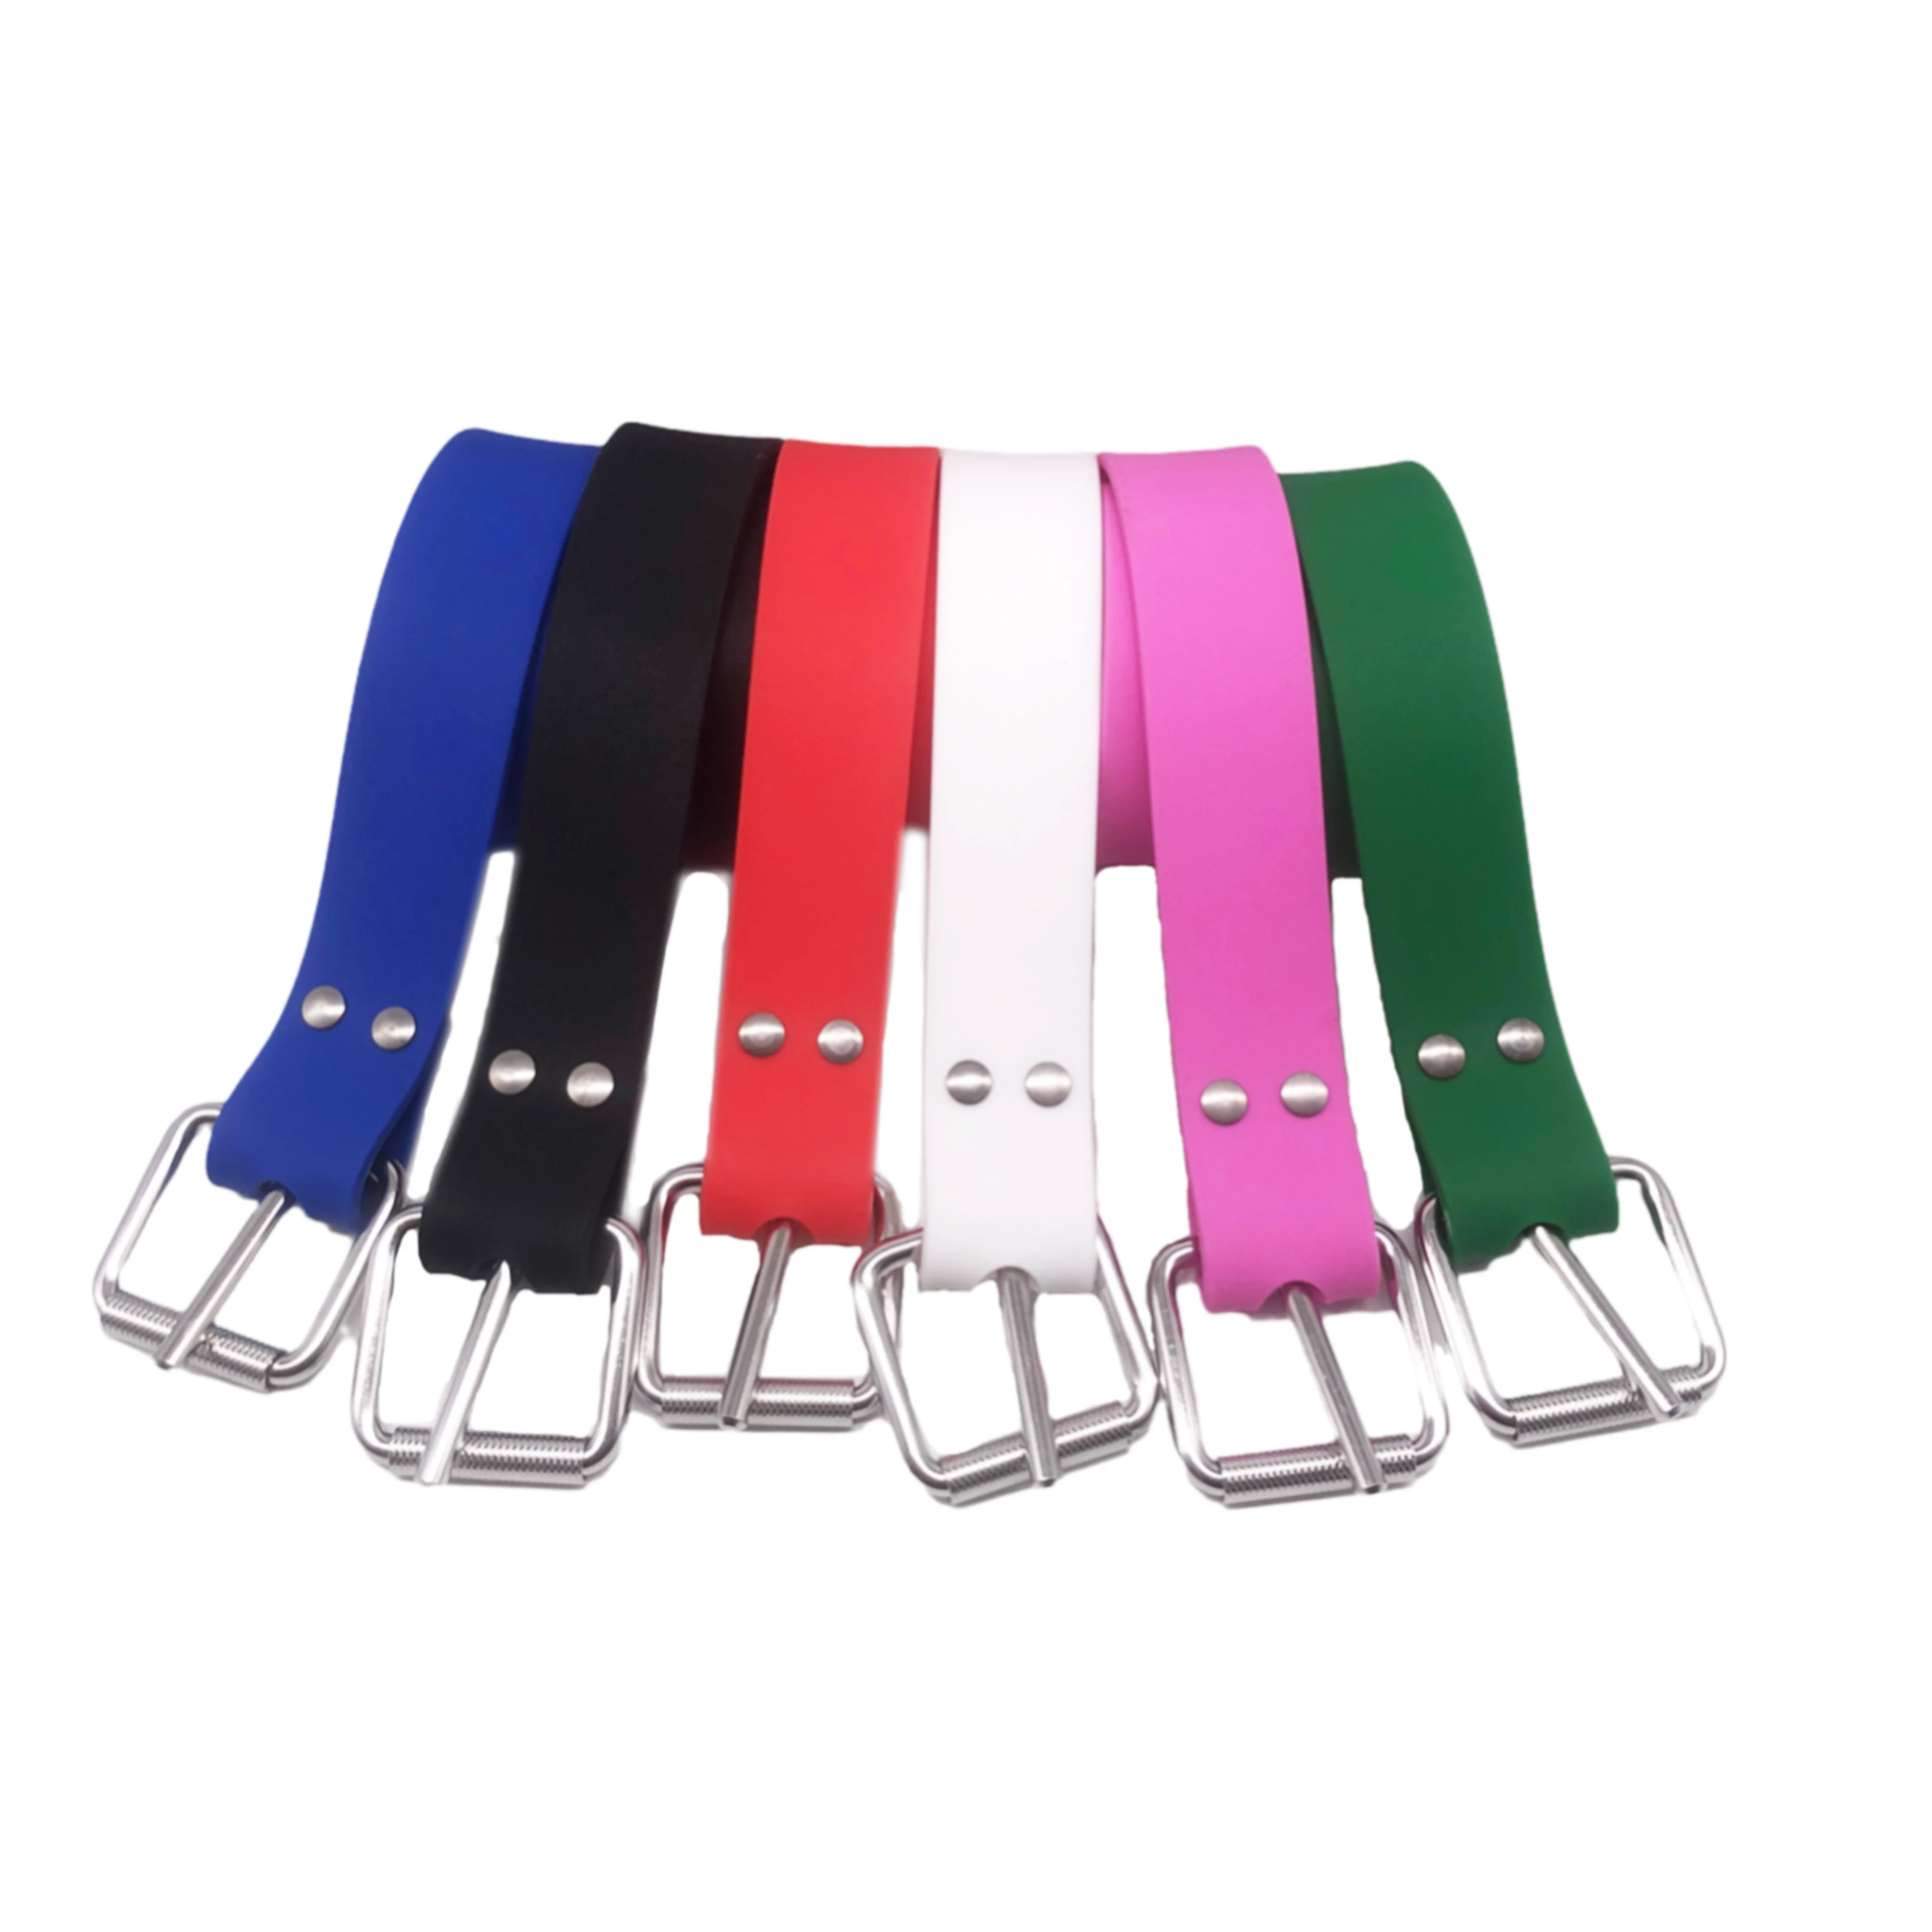 

2021 Plain spearfishing freediving silicone weight belt with stainless steel buckle, Black,white, pink , red, blue, camo pink, camo green